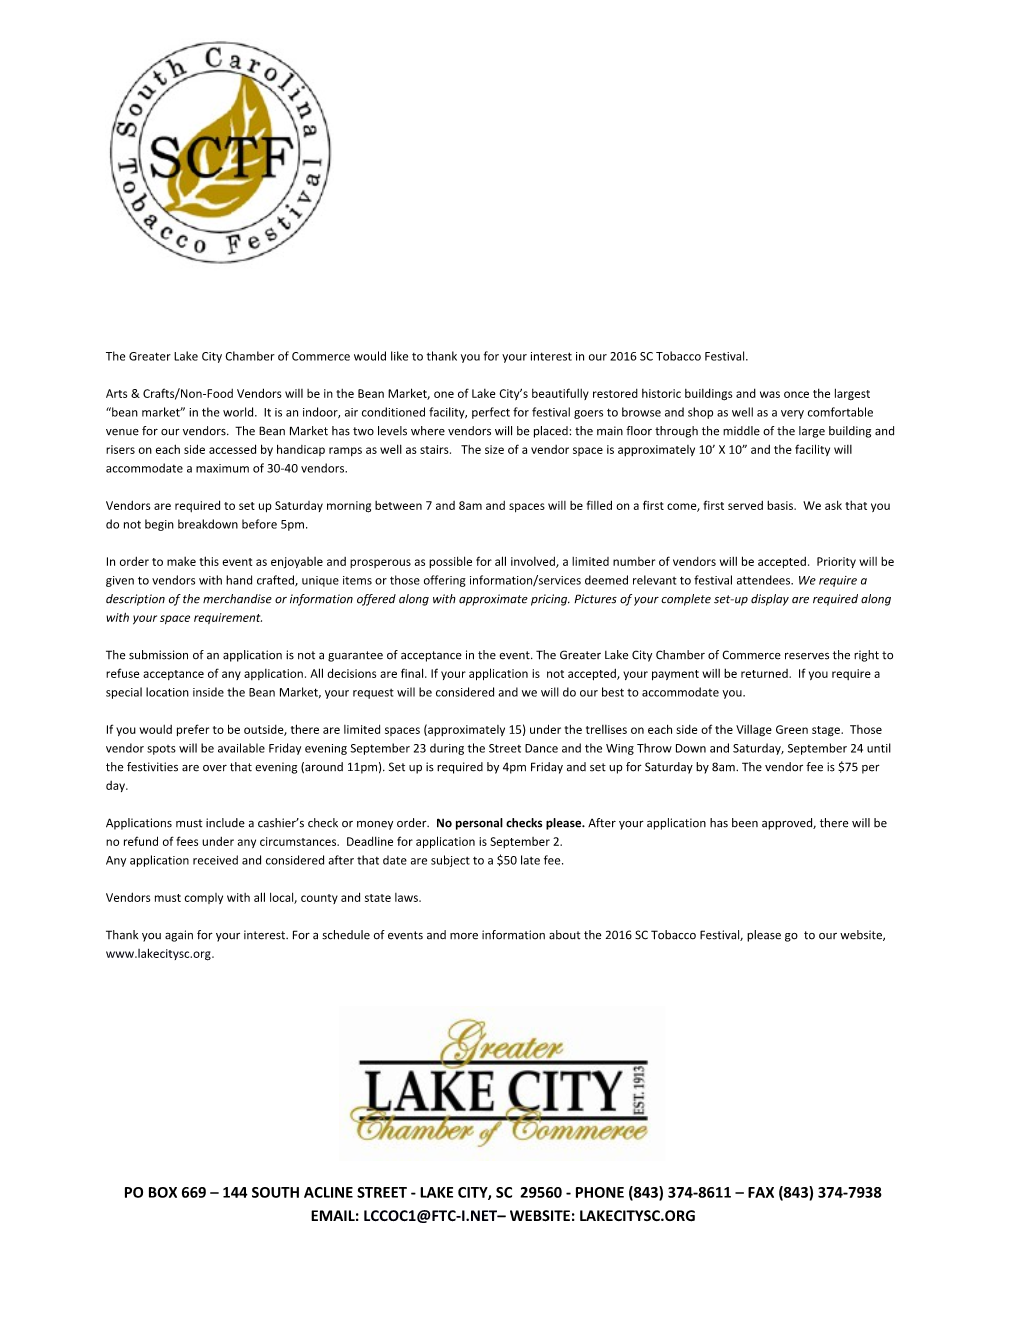 The Greater Lake City Chamber of Commerce Would Like to Thank You for Your Interest In